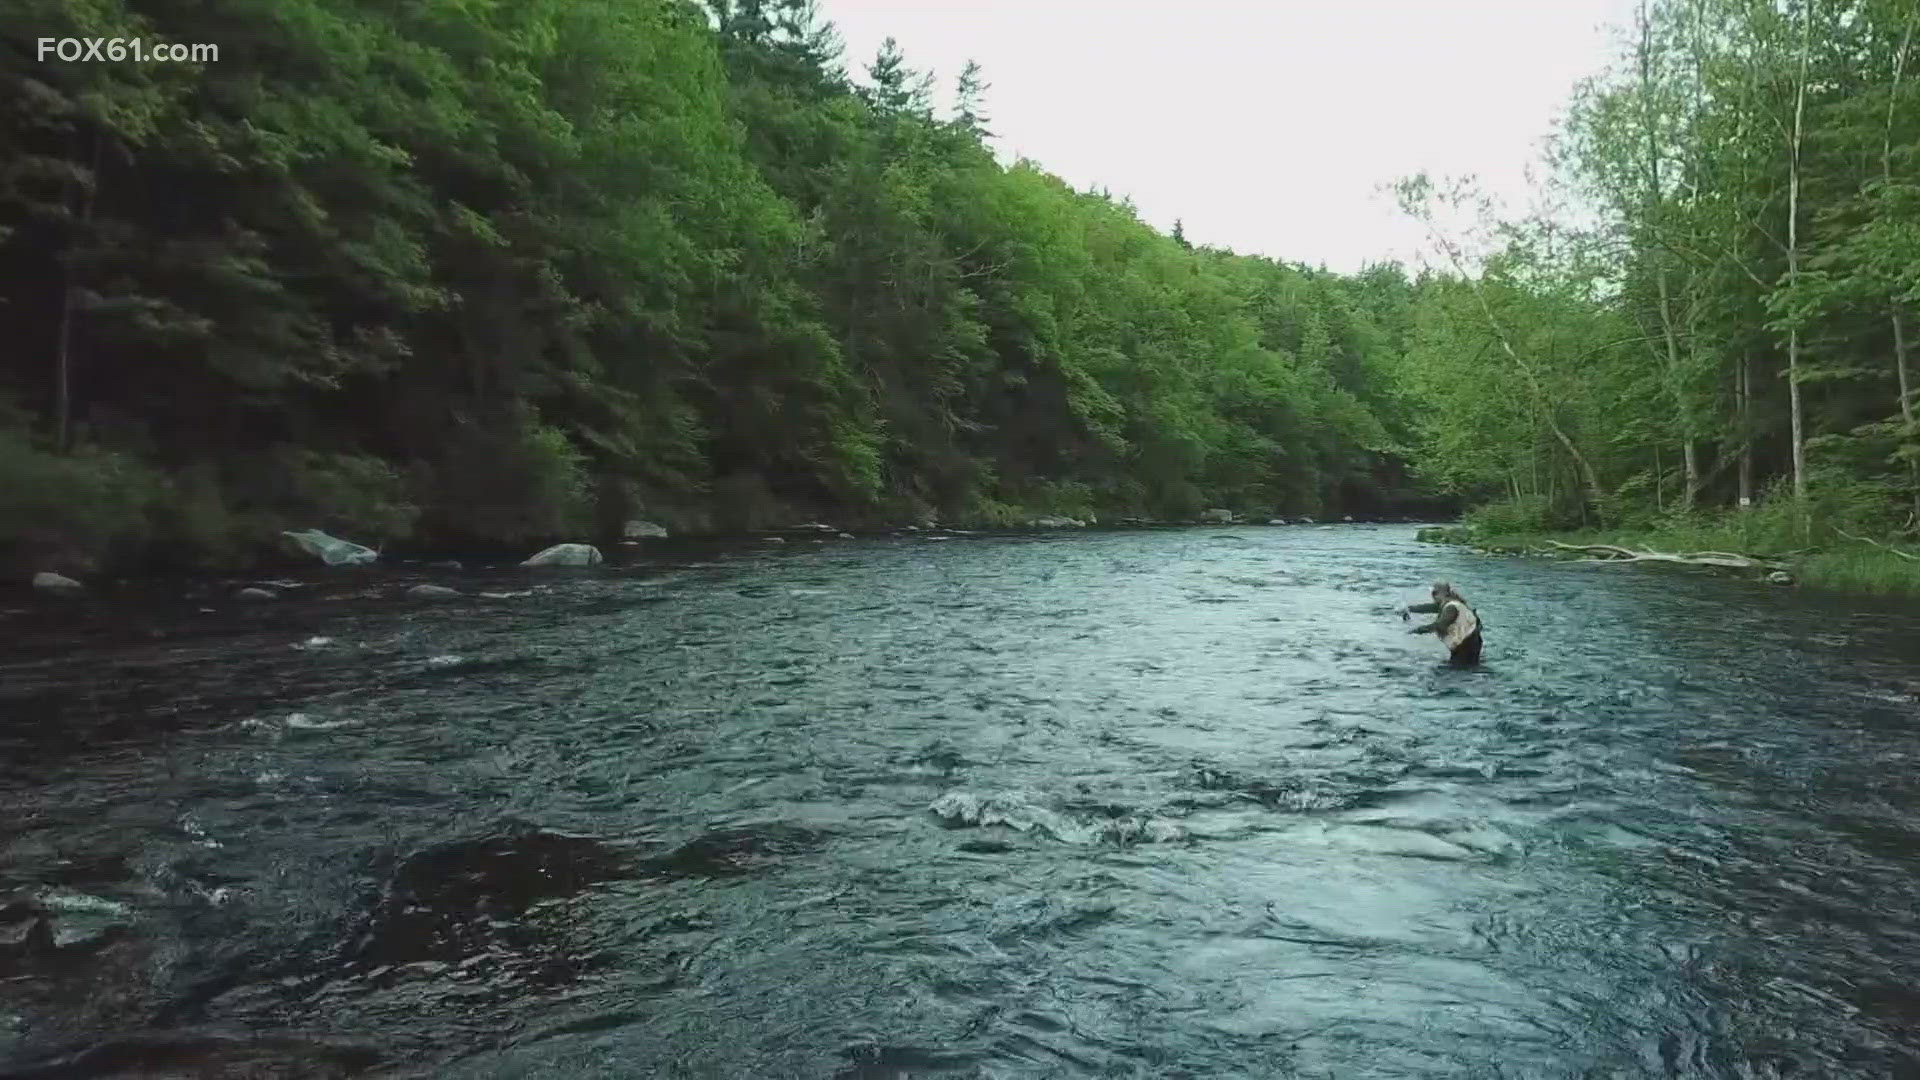 Favorable weather and optimal water conditions make it prime time to fish and do other activities in the Farmington River, "a gem of New England."